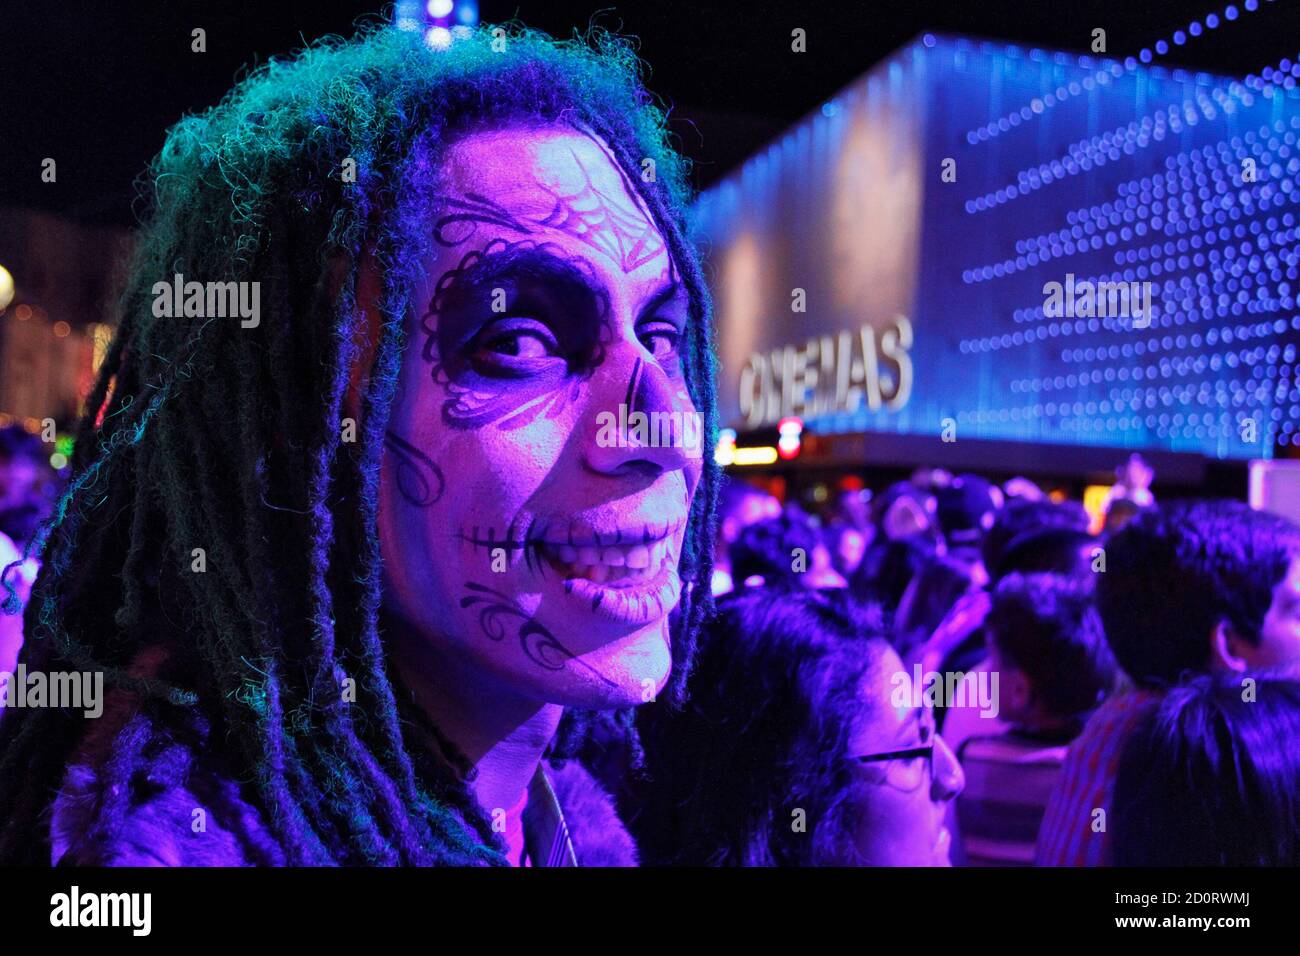 Kenny O'Brien, dressed as the Joker, poses while waiting for the midnight premiere of 'The Dark Knight Rises', the final instalment of Christopher Nolan's Batman trilogy, in Universal City, California, July 19, 2012.  REUTERS/Jonathan Alcorn (UNITED STATES - Tags: ENTERTAINMENT) Stock Photo